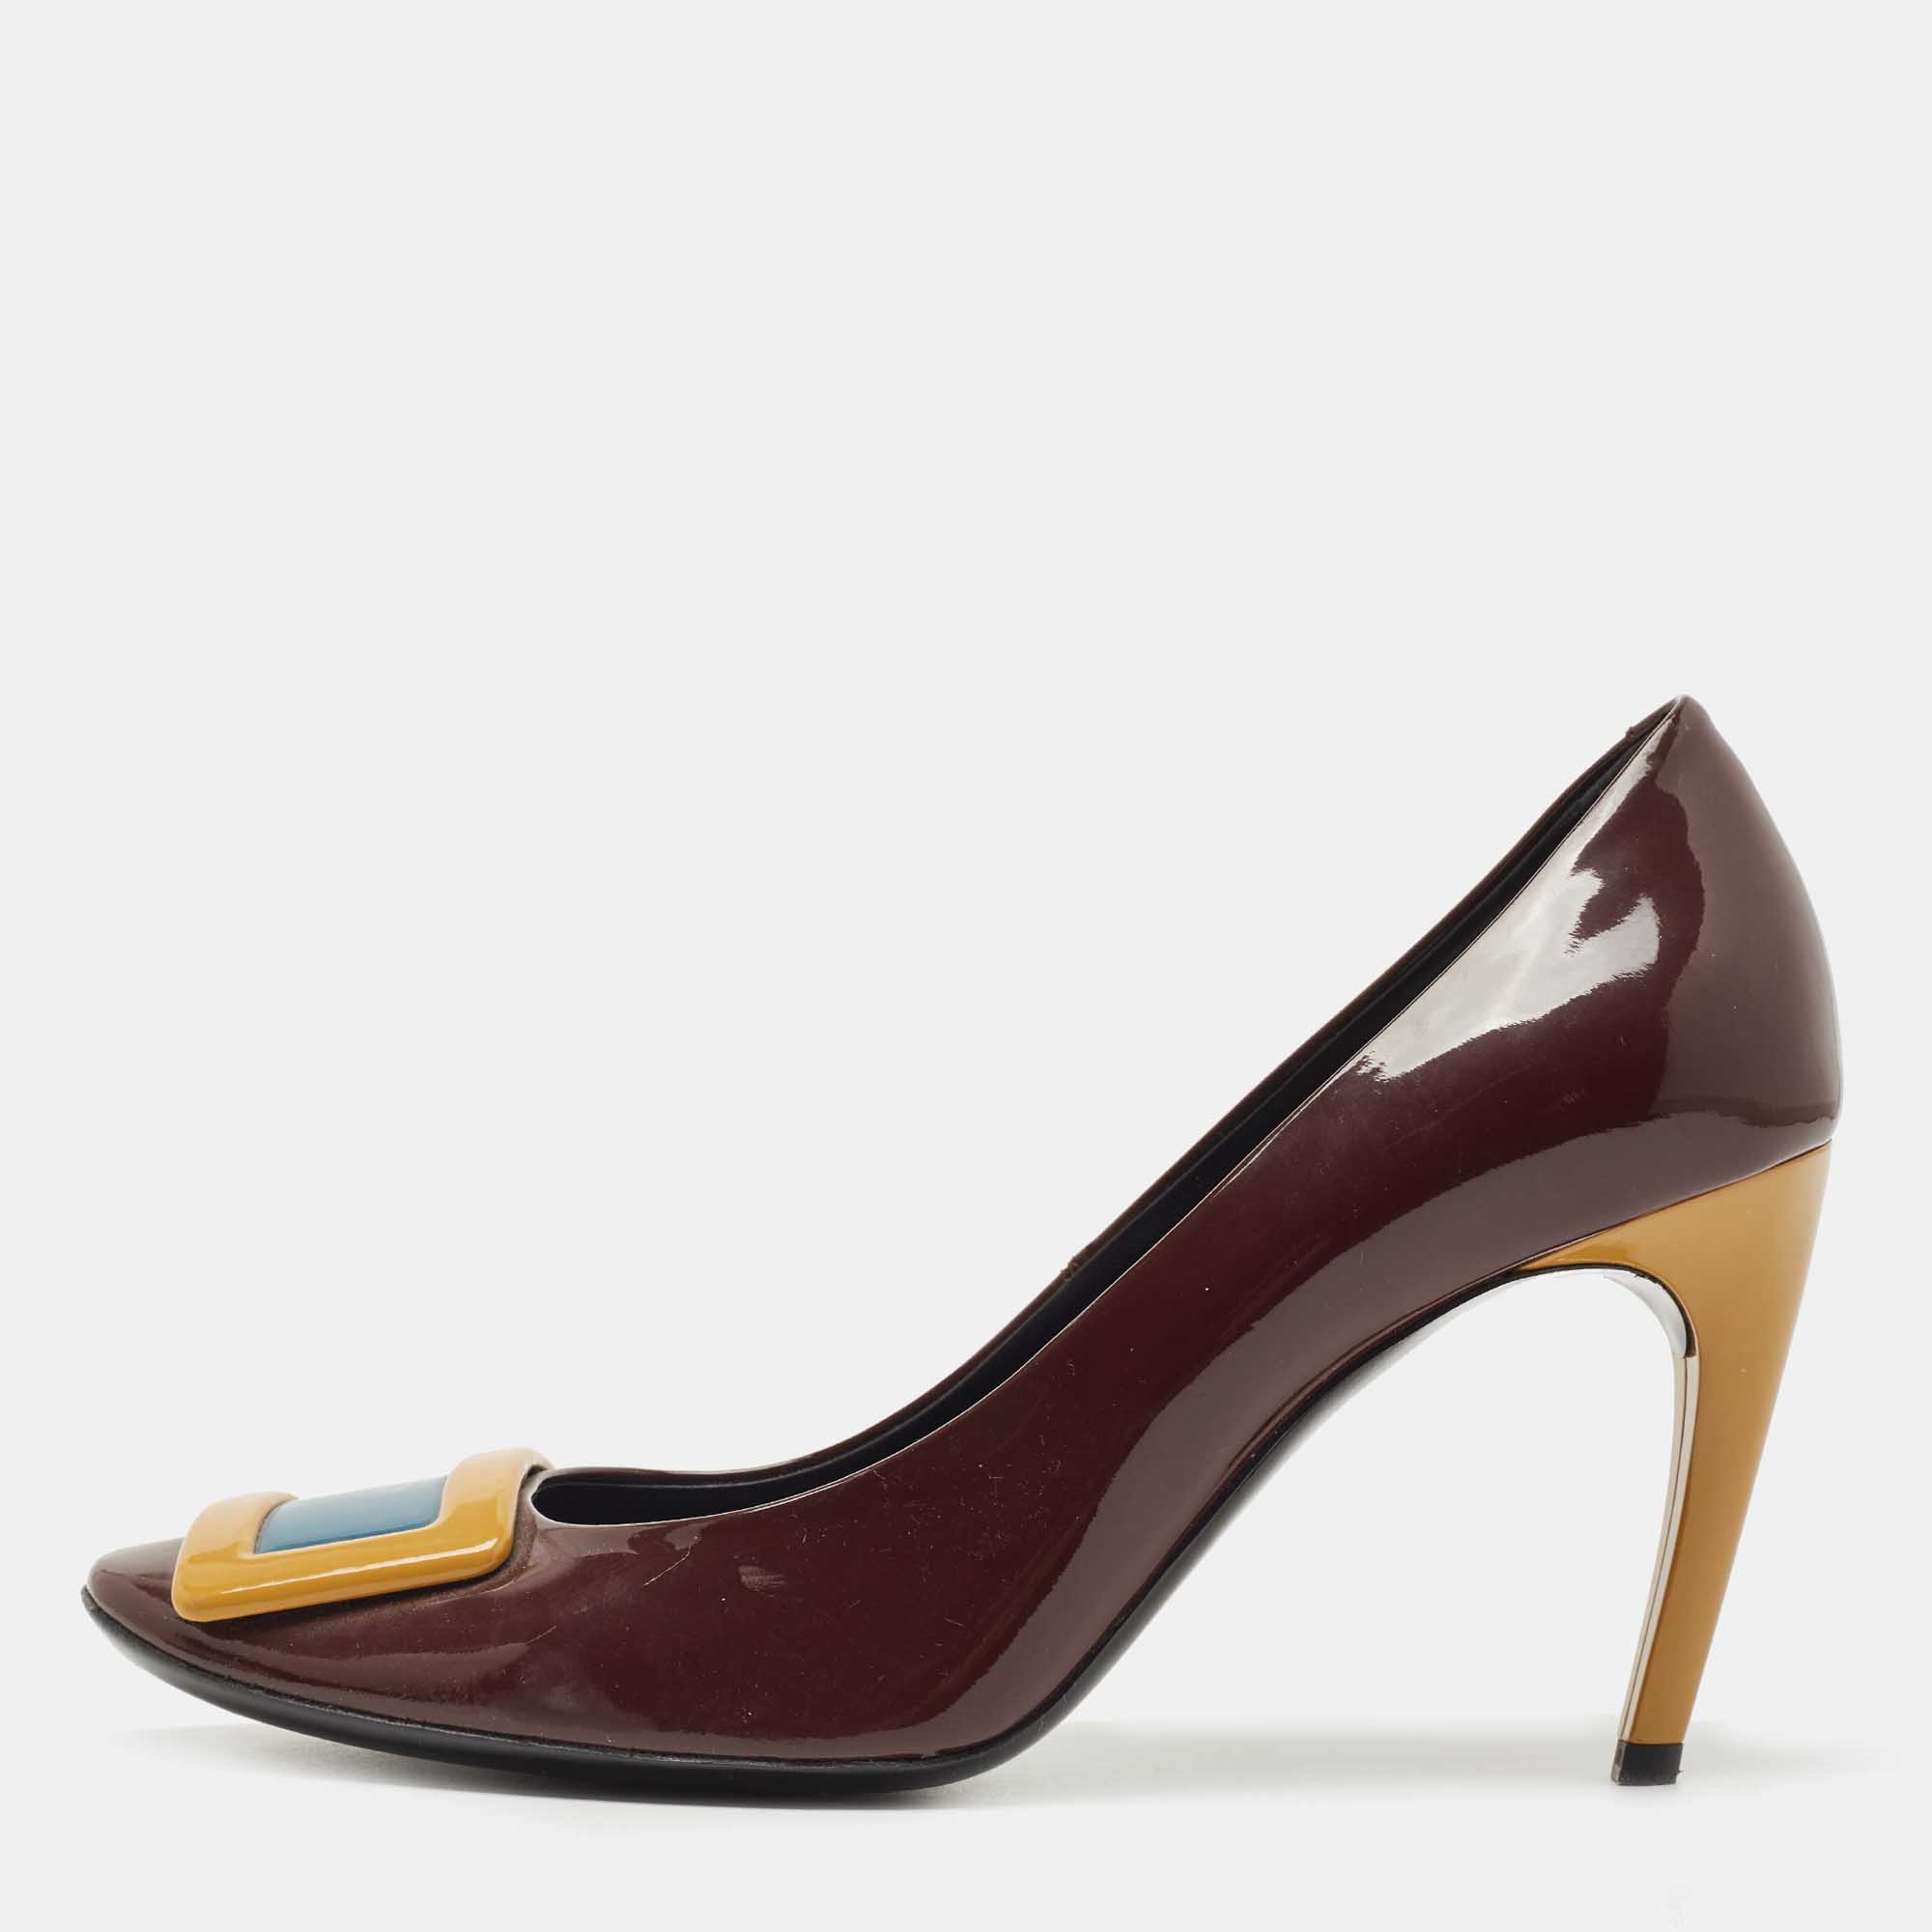 Pre-owned Roger Vivier Burdundy Patent Leather Belle Square Toe Pumps Size 40 In Burgundy